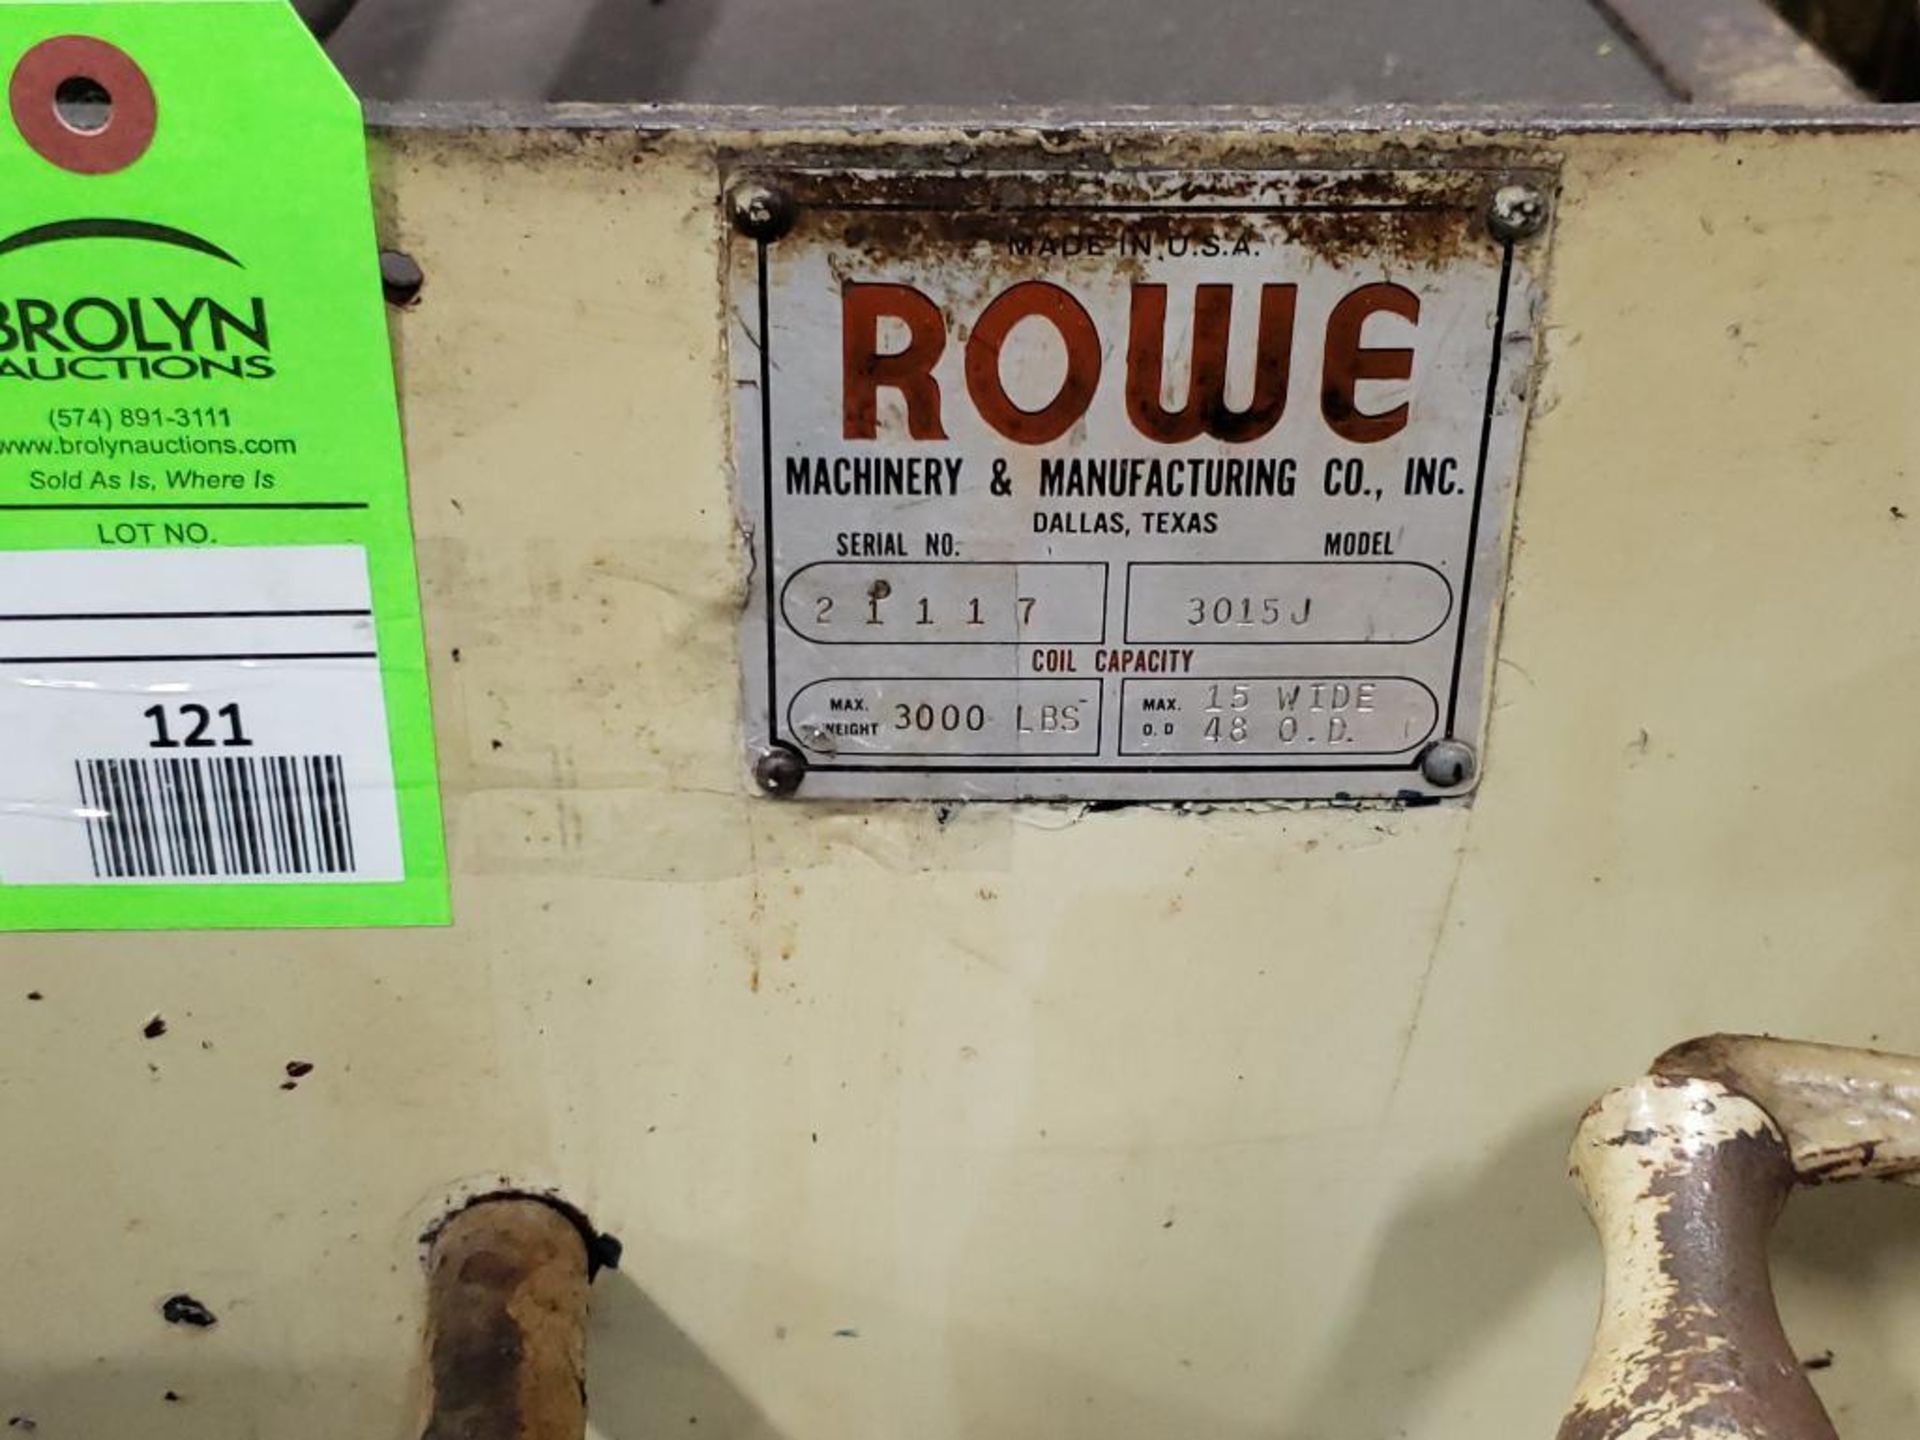 Rowe 3015J coil cradle. 3000LBS Capacity, 15" Wide, 48" O.D. - Image 15 of 15